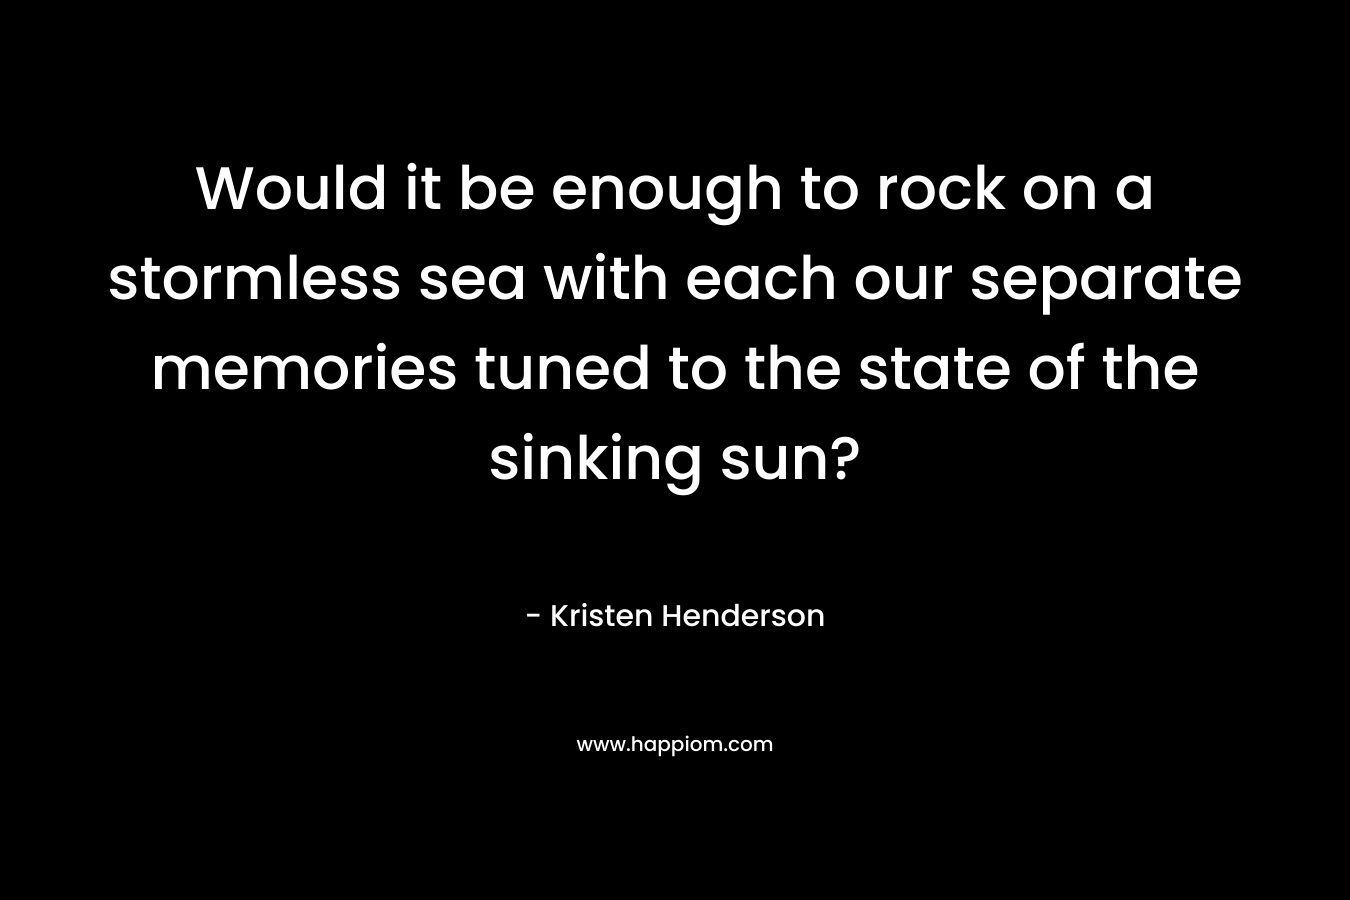 Would it be enough to rock on a stormless sea with each our separate memories tuned to the state of the sinking sun? – Kristen Henderson